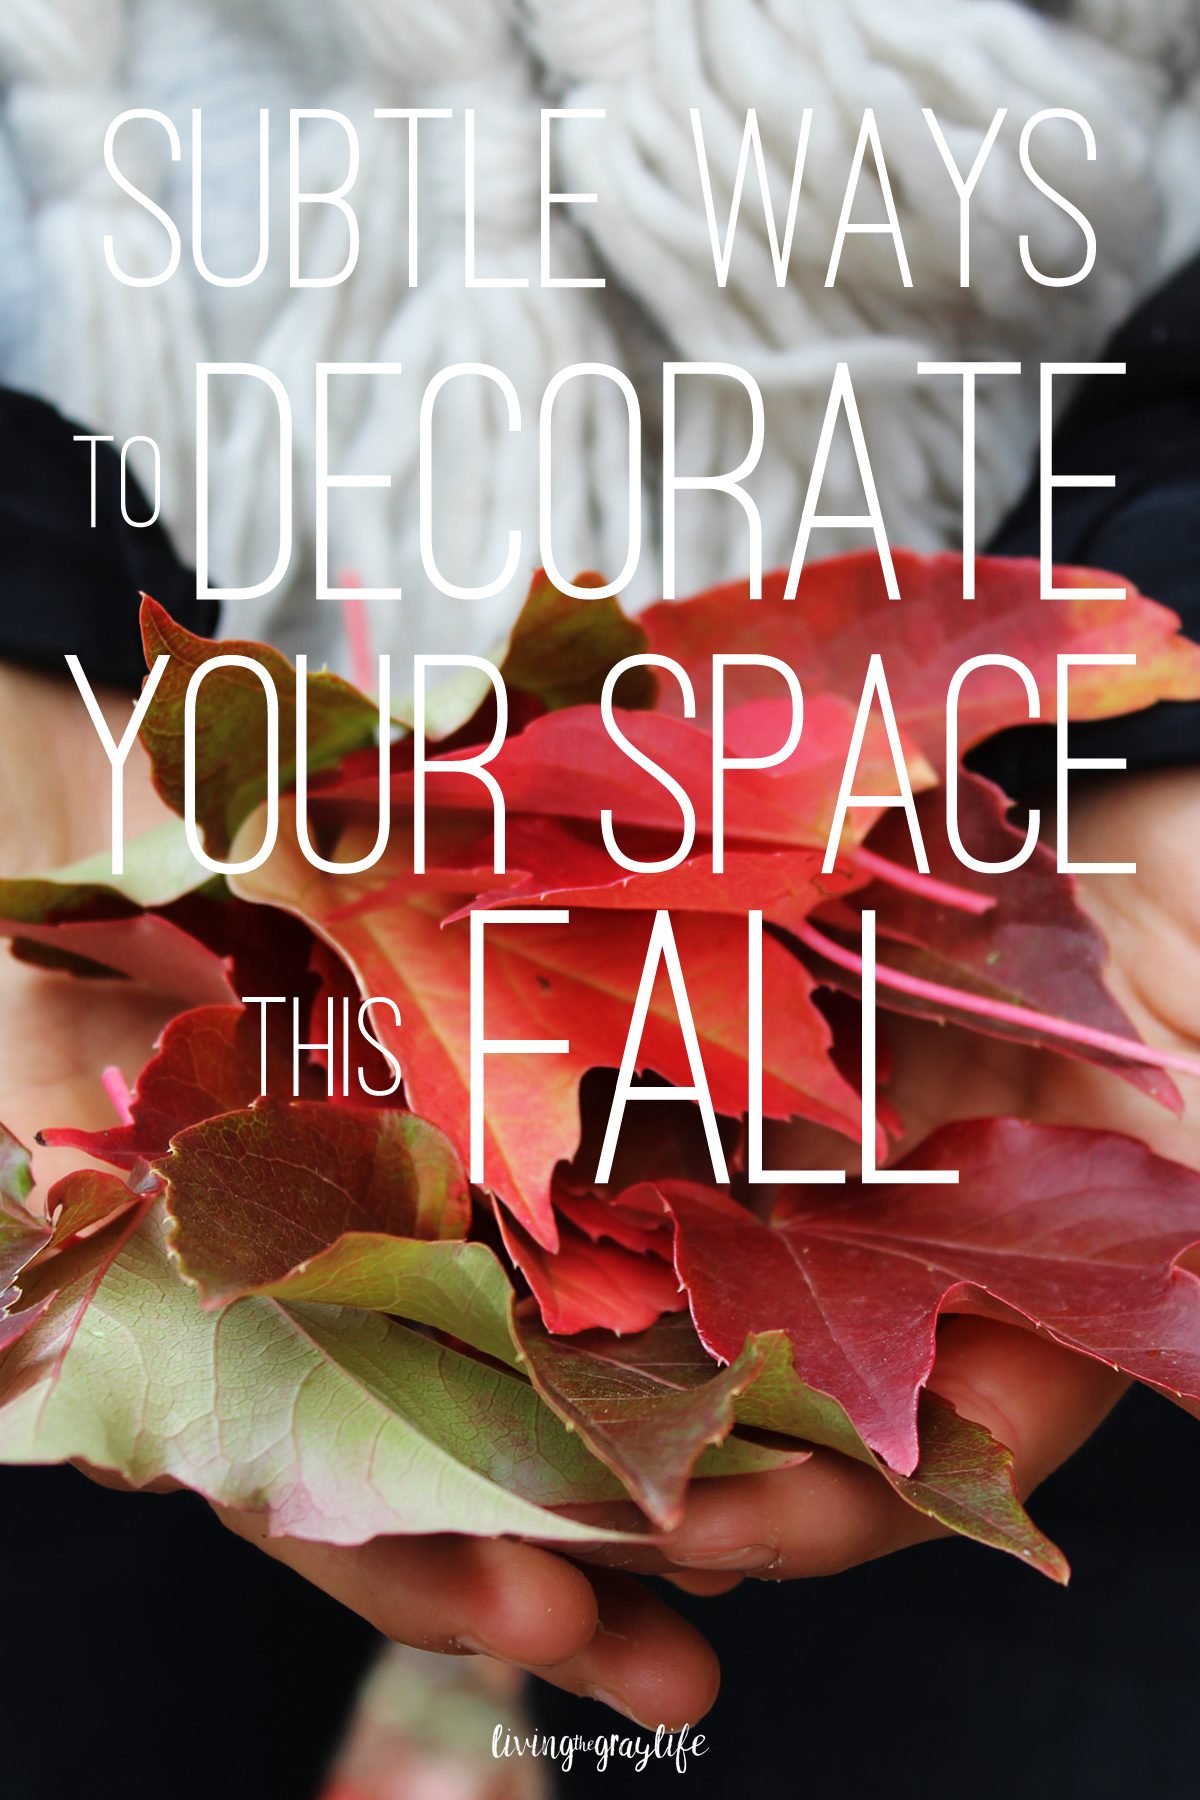 Subtle ways to decorate your space this fall | Perfect for college dorms, apartments, or bedrooms